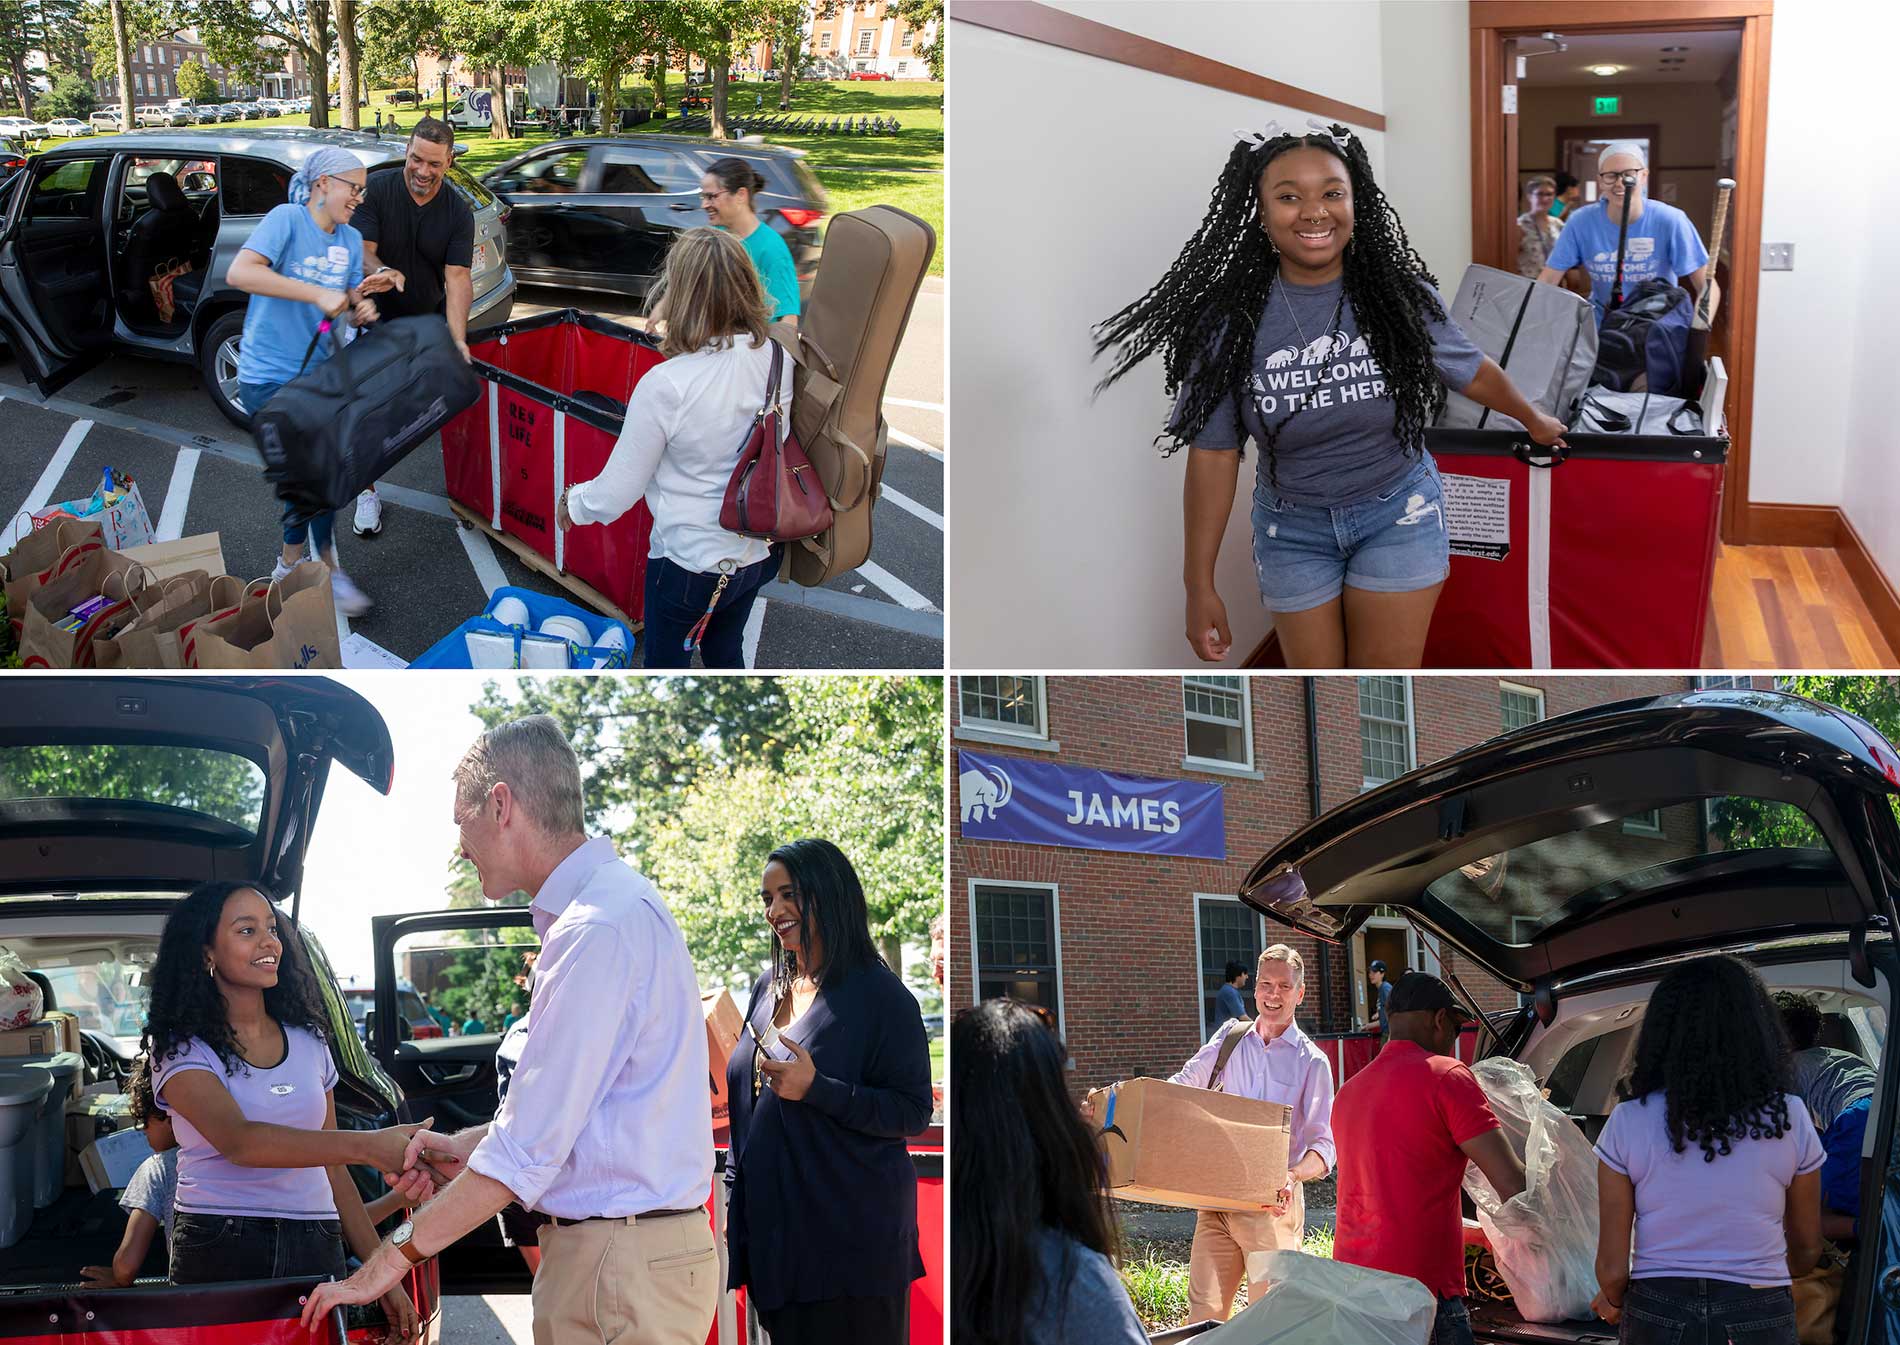 Amherst staff, including the president, help new students uload their belongings from cars.